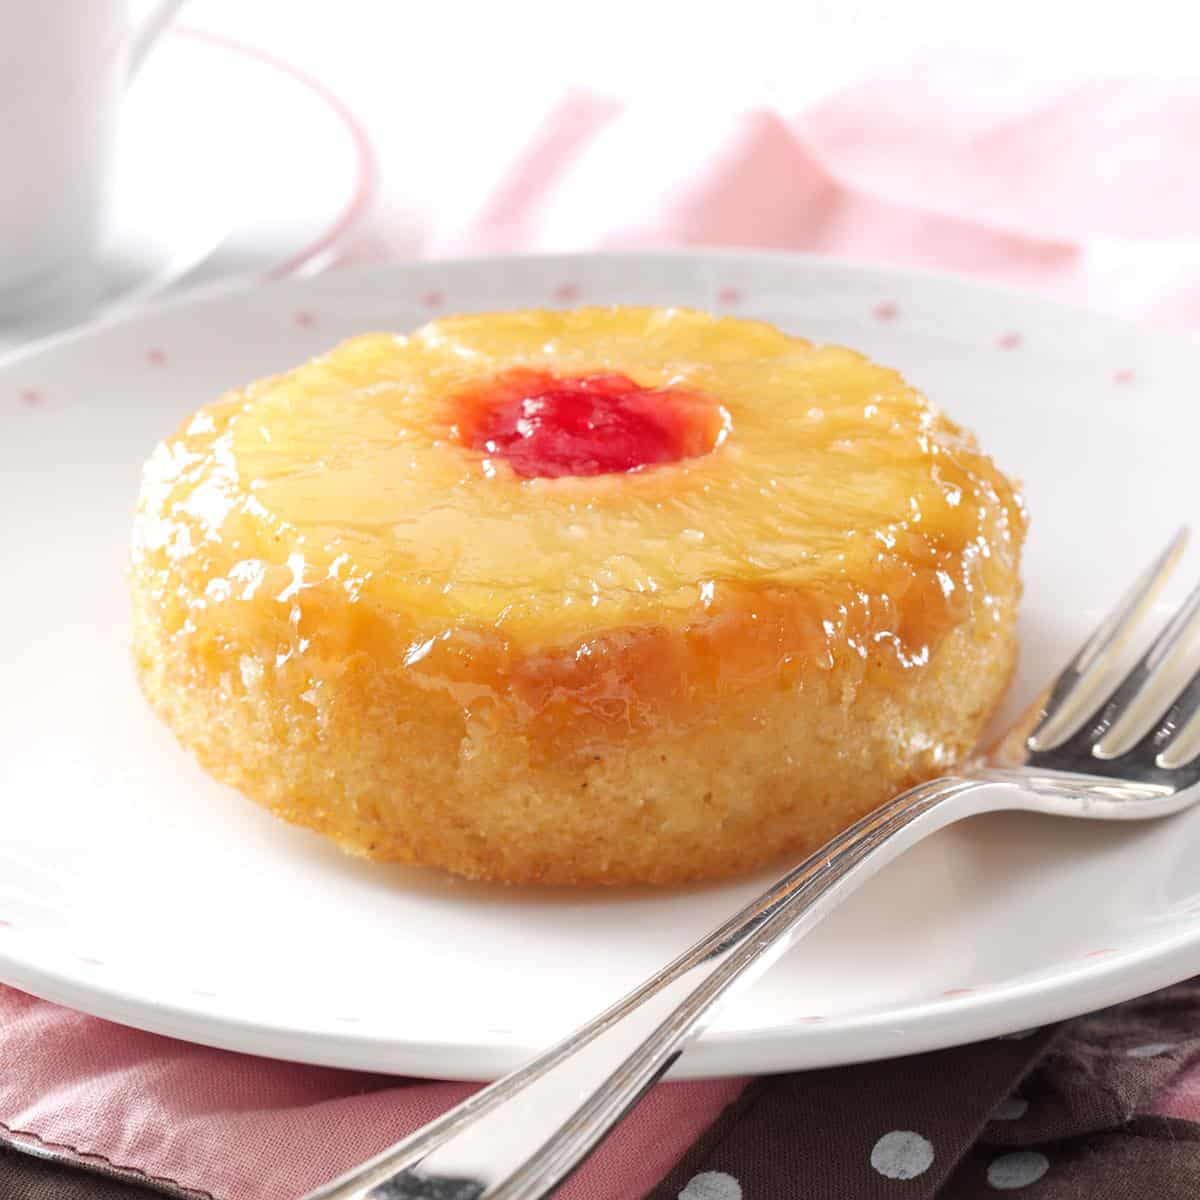 Pineapple upside down cake for two